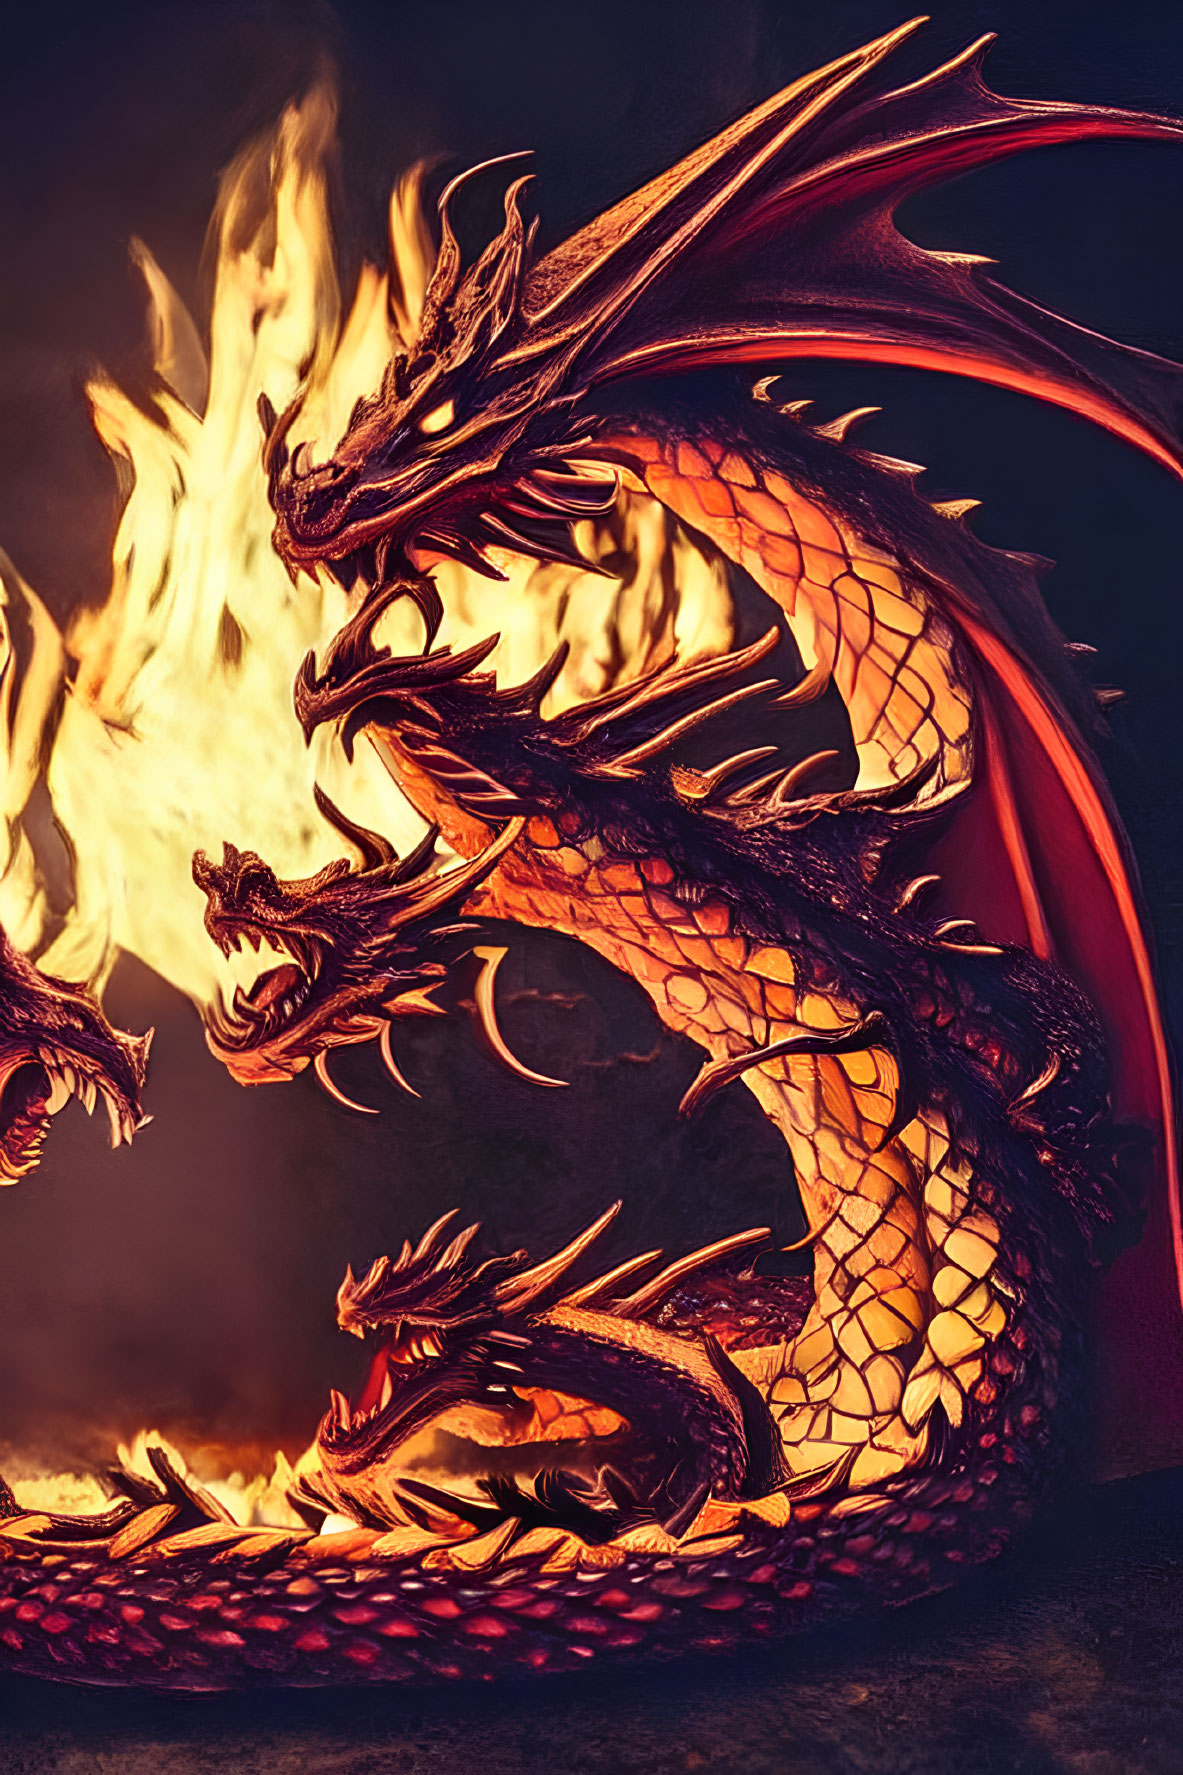 Multi-Headed Dragon Surrounded by Flames